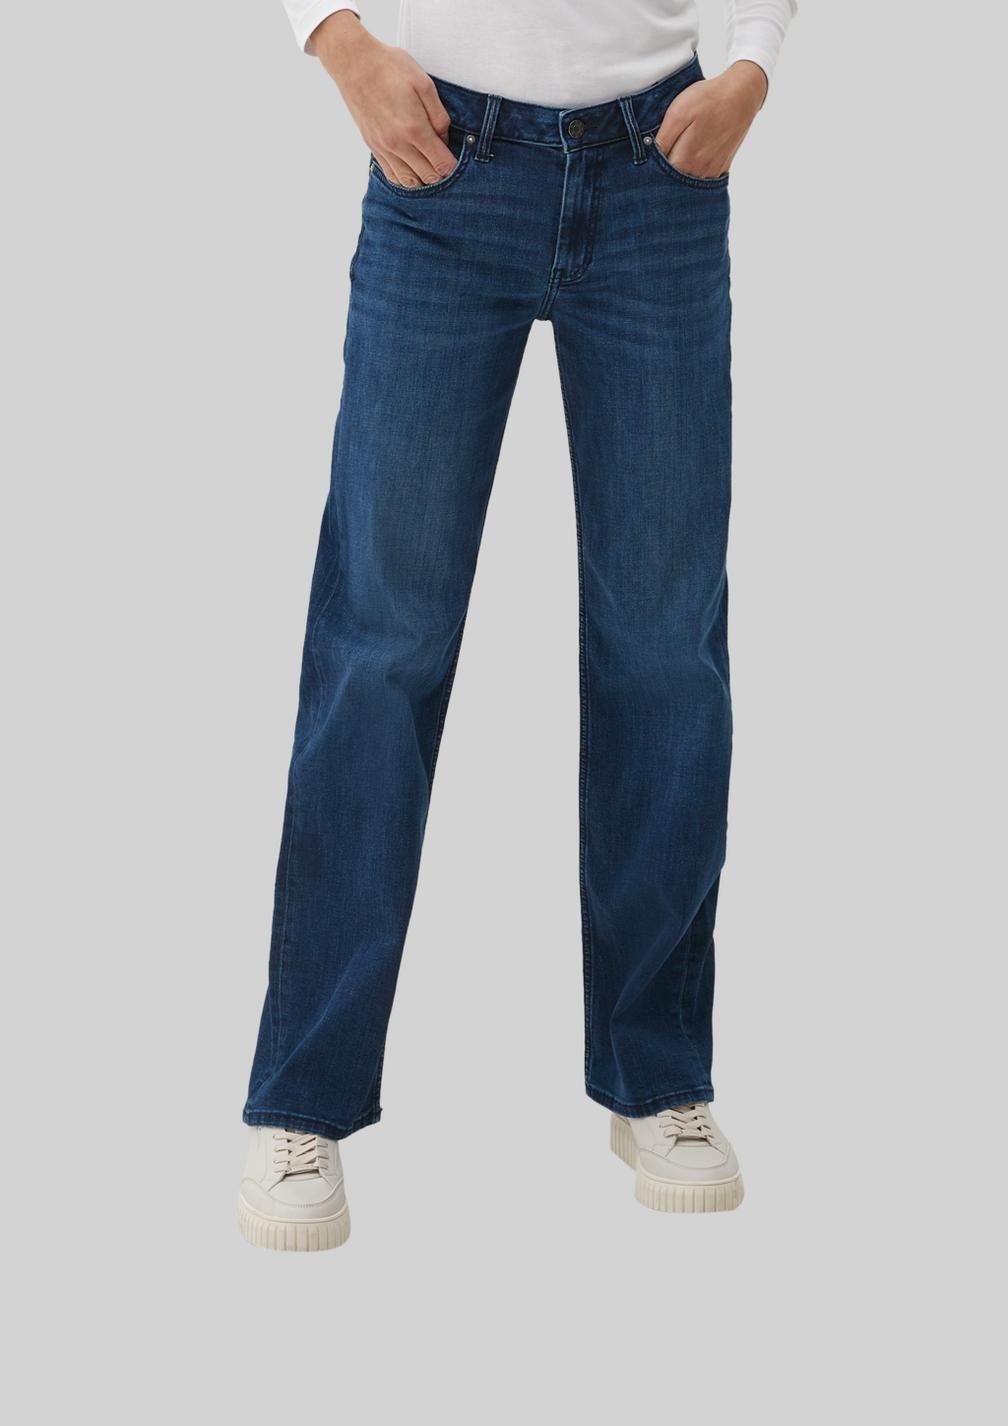 s.Oliver rise Straight Waschung, tiefblau mit leichter Comfort-fit-Jeans / Fit Leg Mid KAROLIN / Relaxed